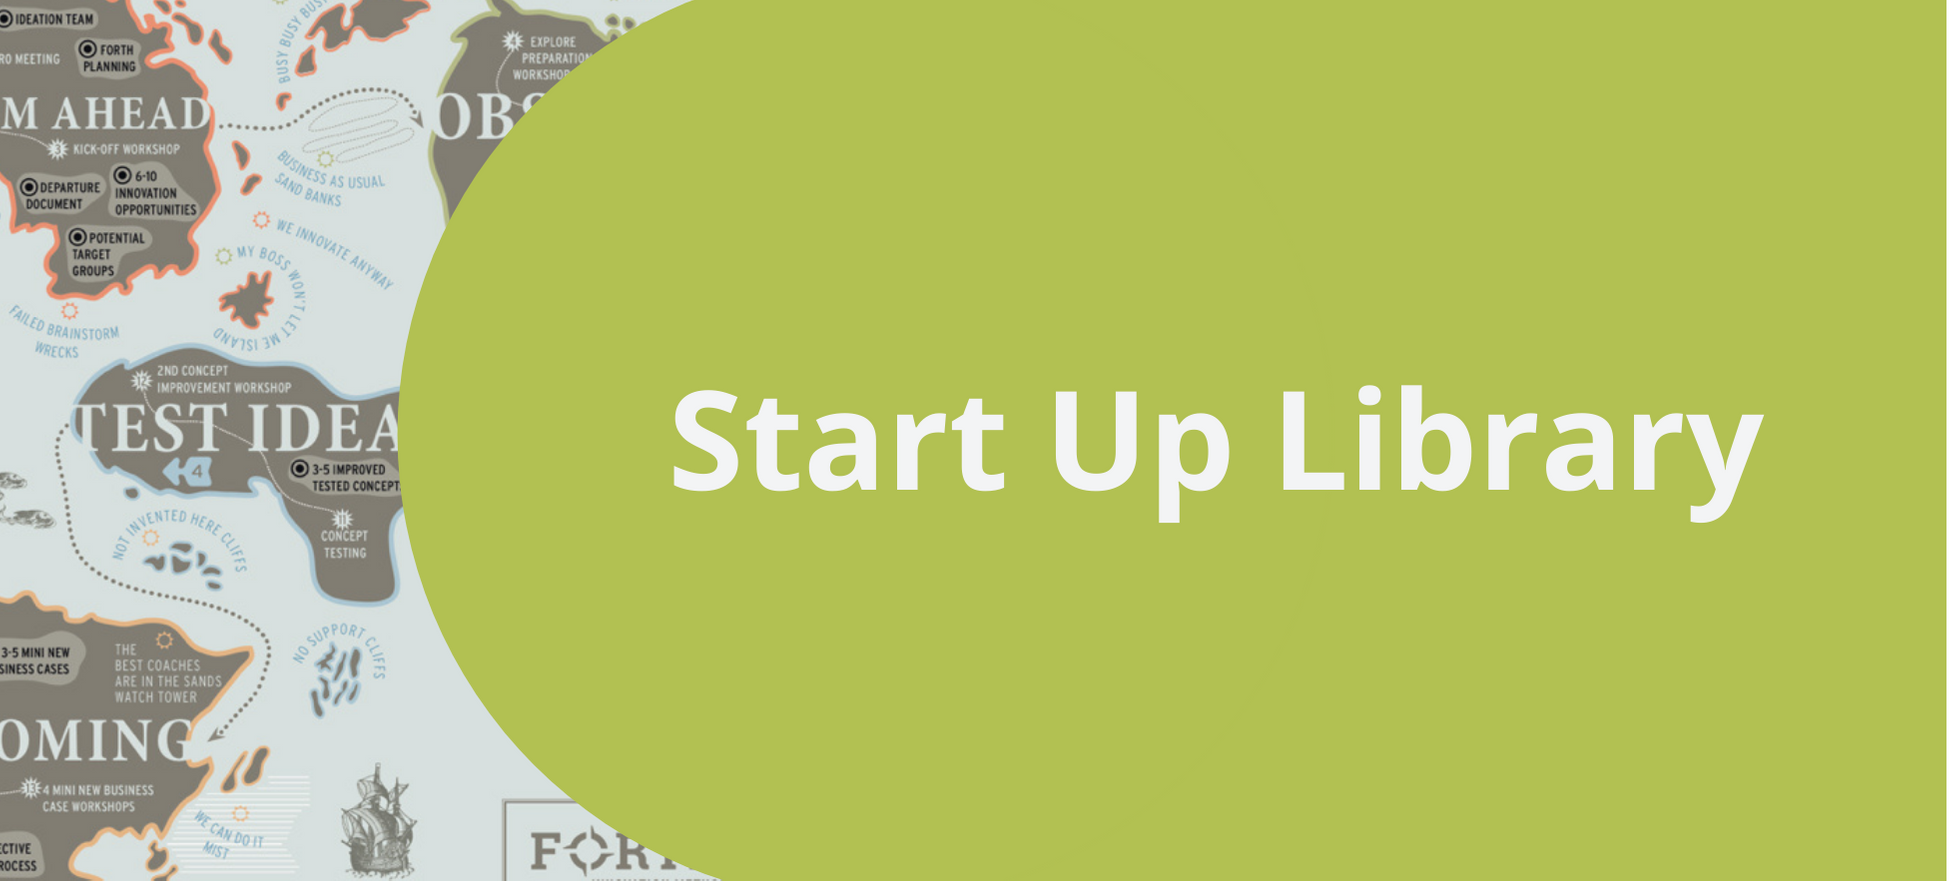 Start Up Library